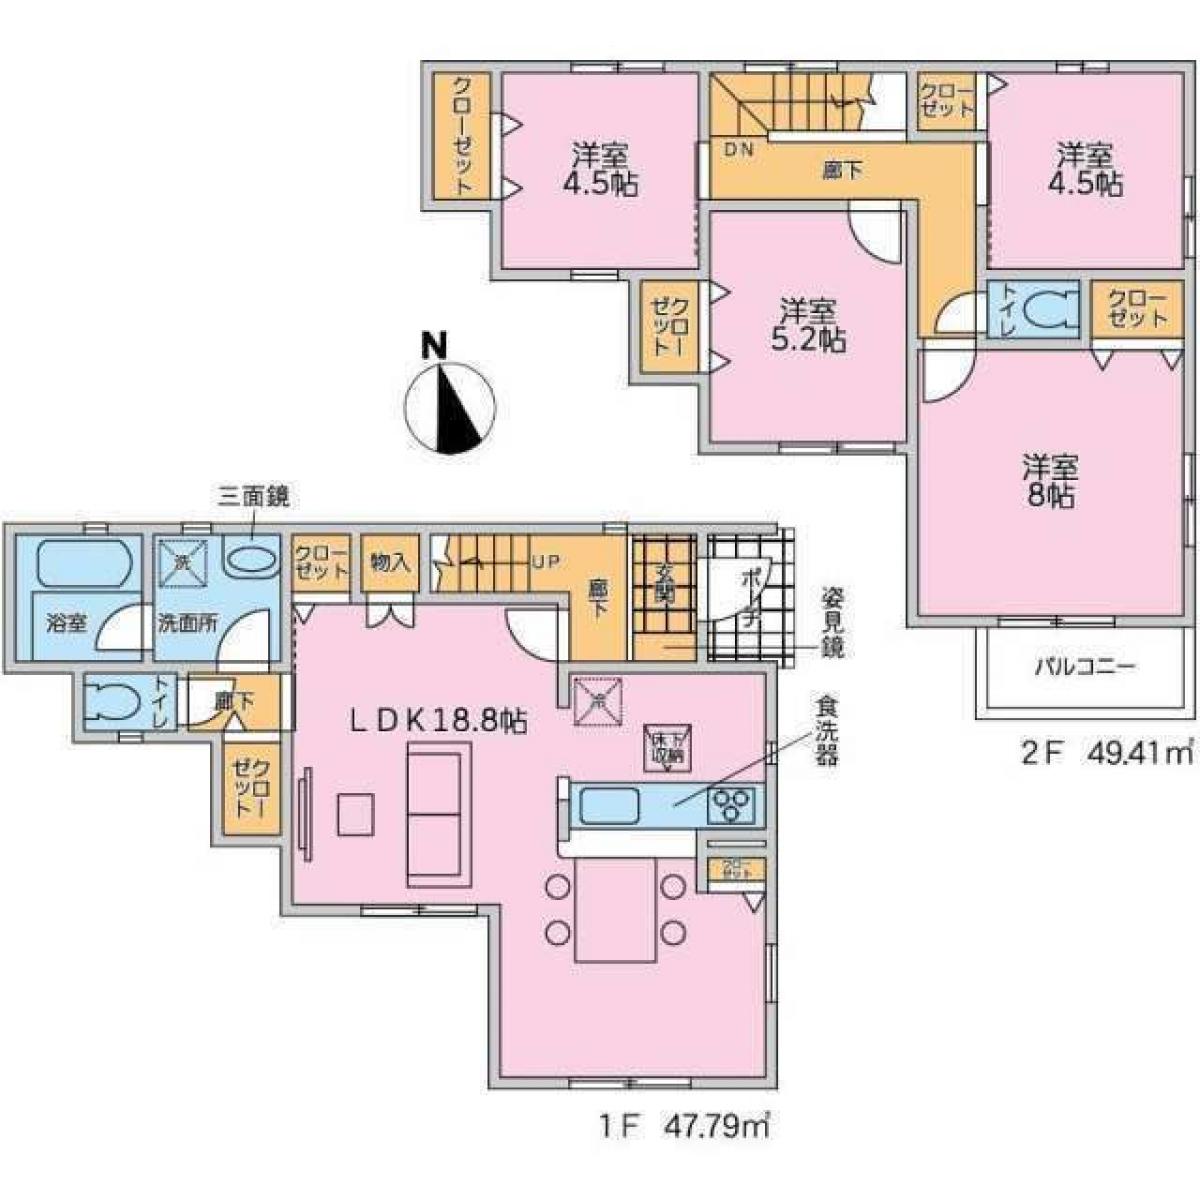 Picture of Home For Sale in Akishima Shi, Tokyo, Japan